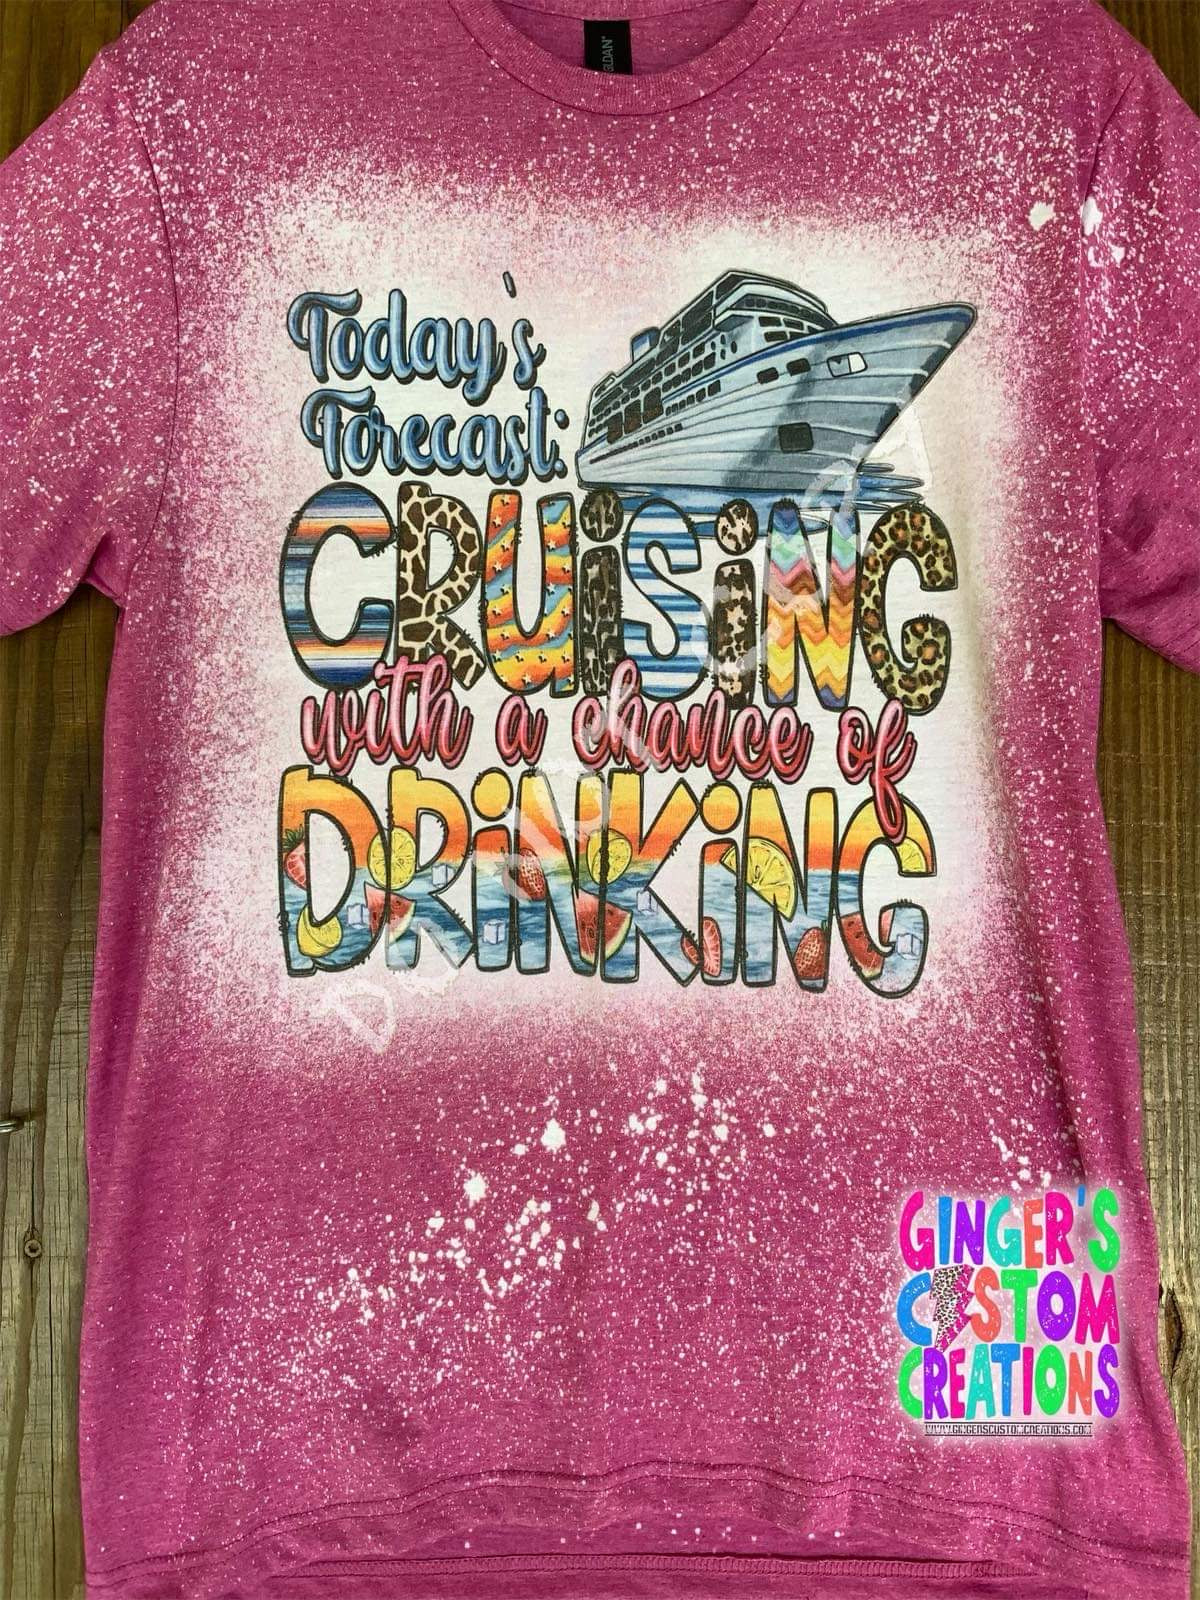 Todays forecast cruising with a chance of drinking - BLEACHED TSHIRT